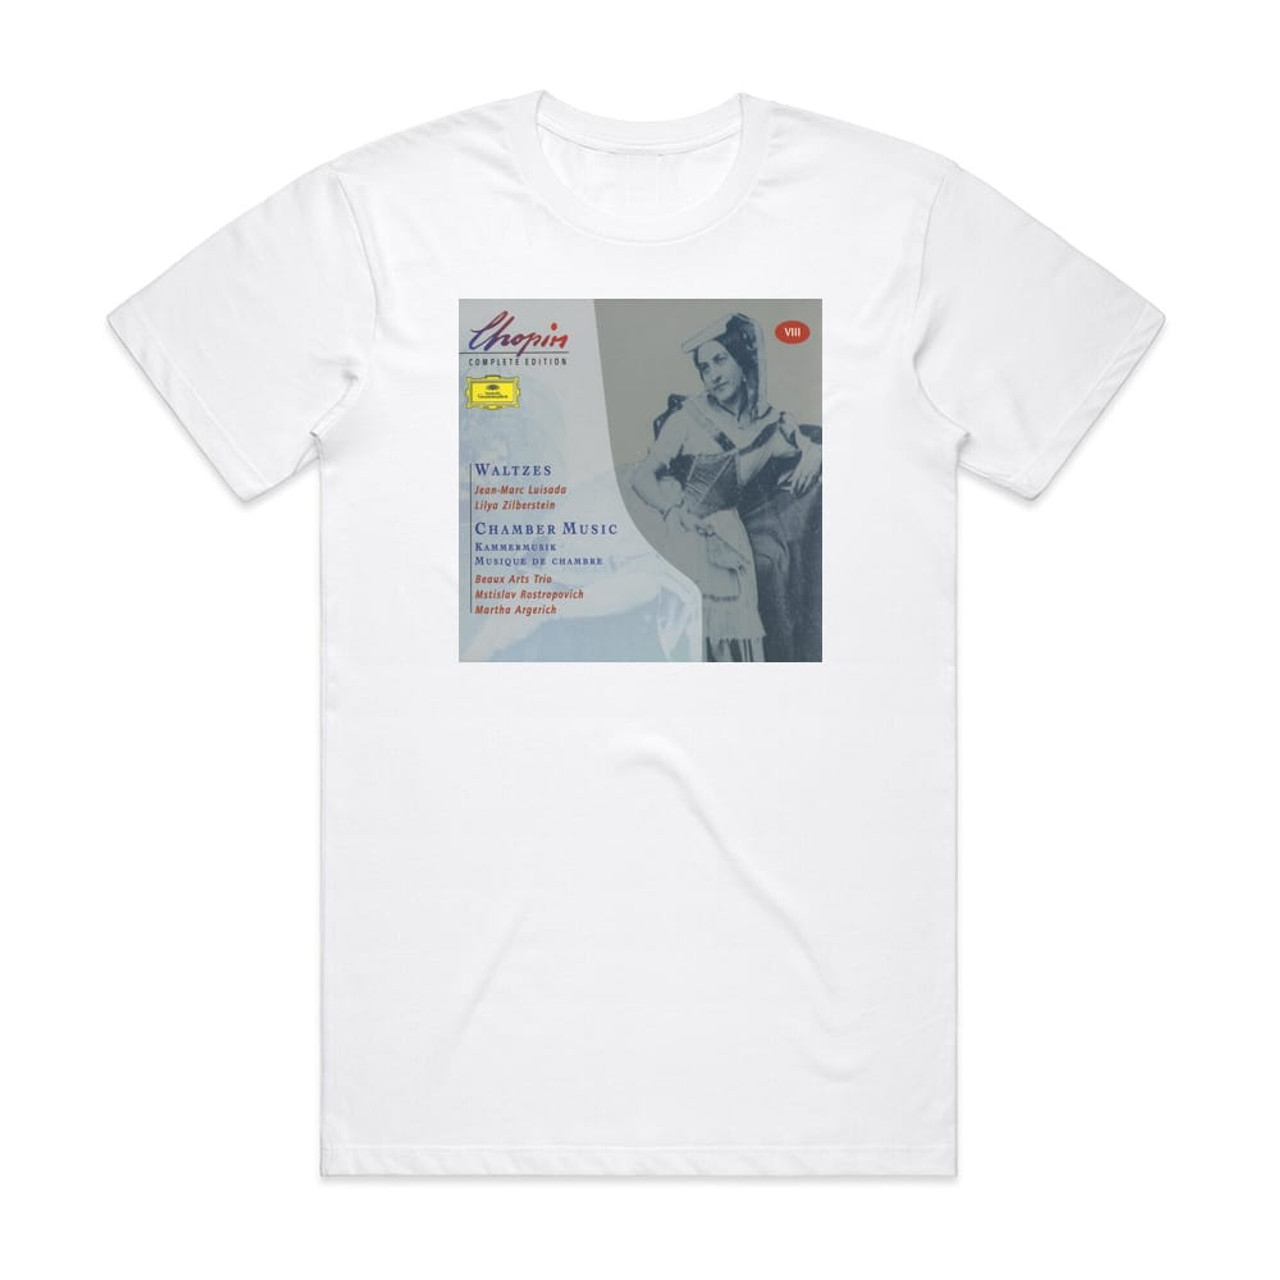 Frederic　Chopin　Album　T-Shirt　Complete　White　Edition　Cover